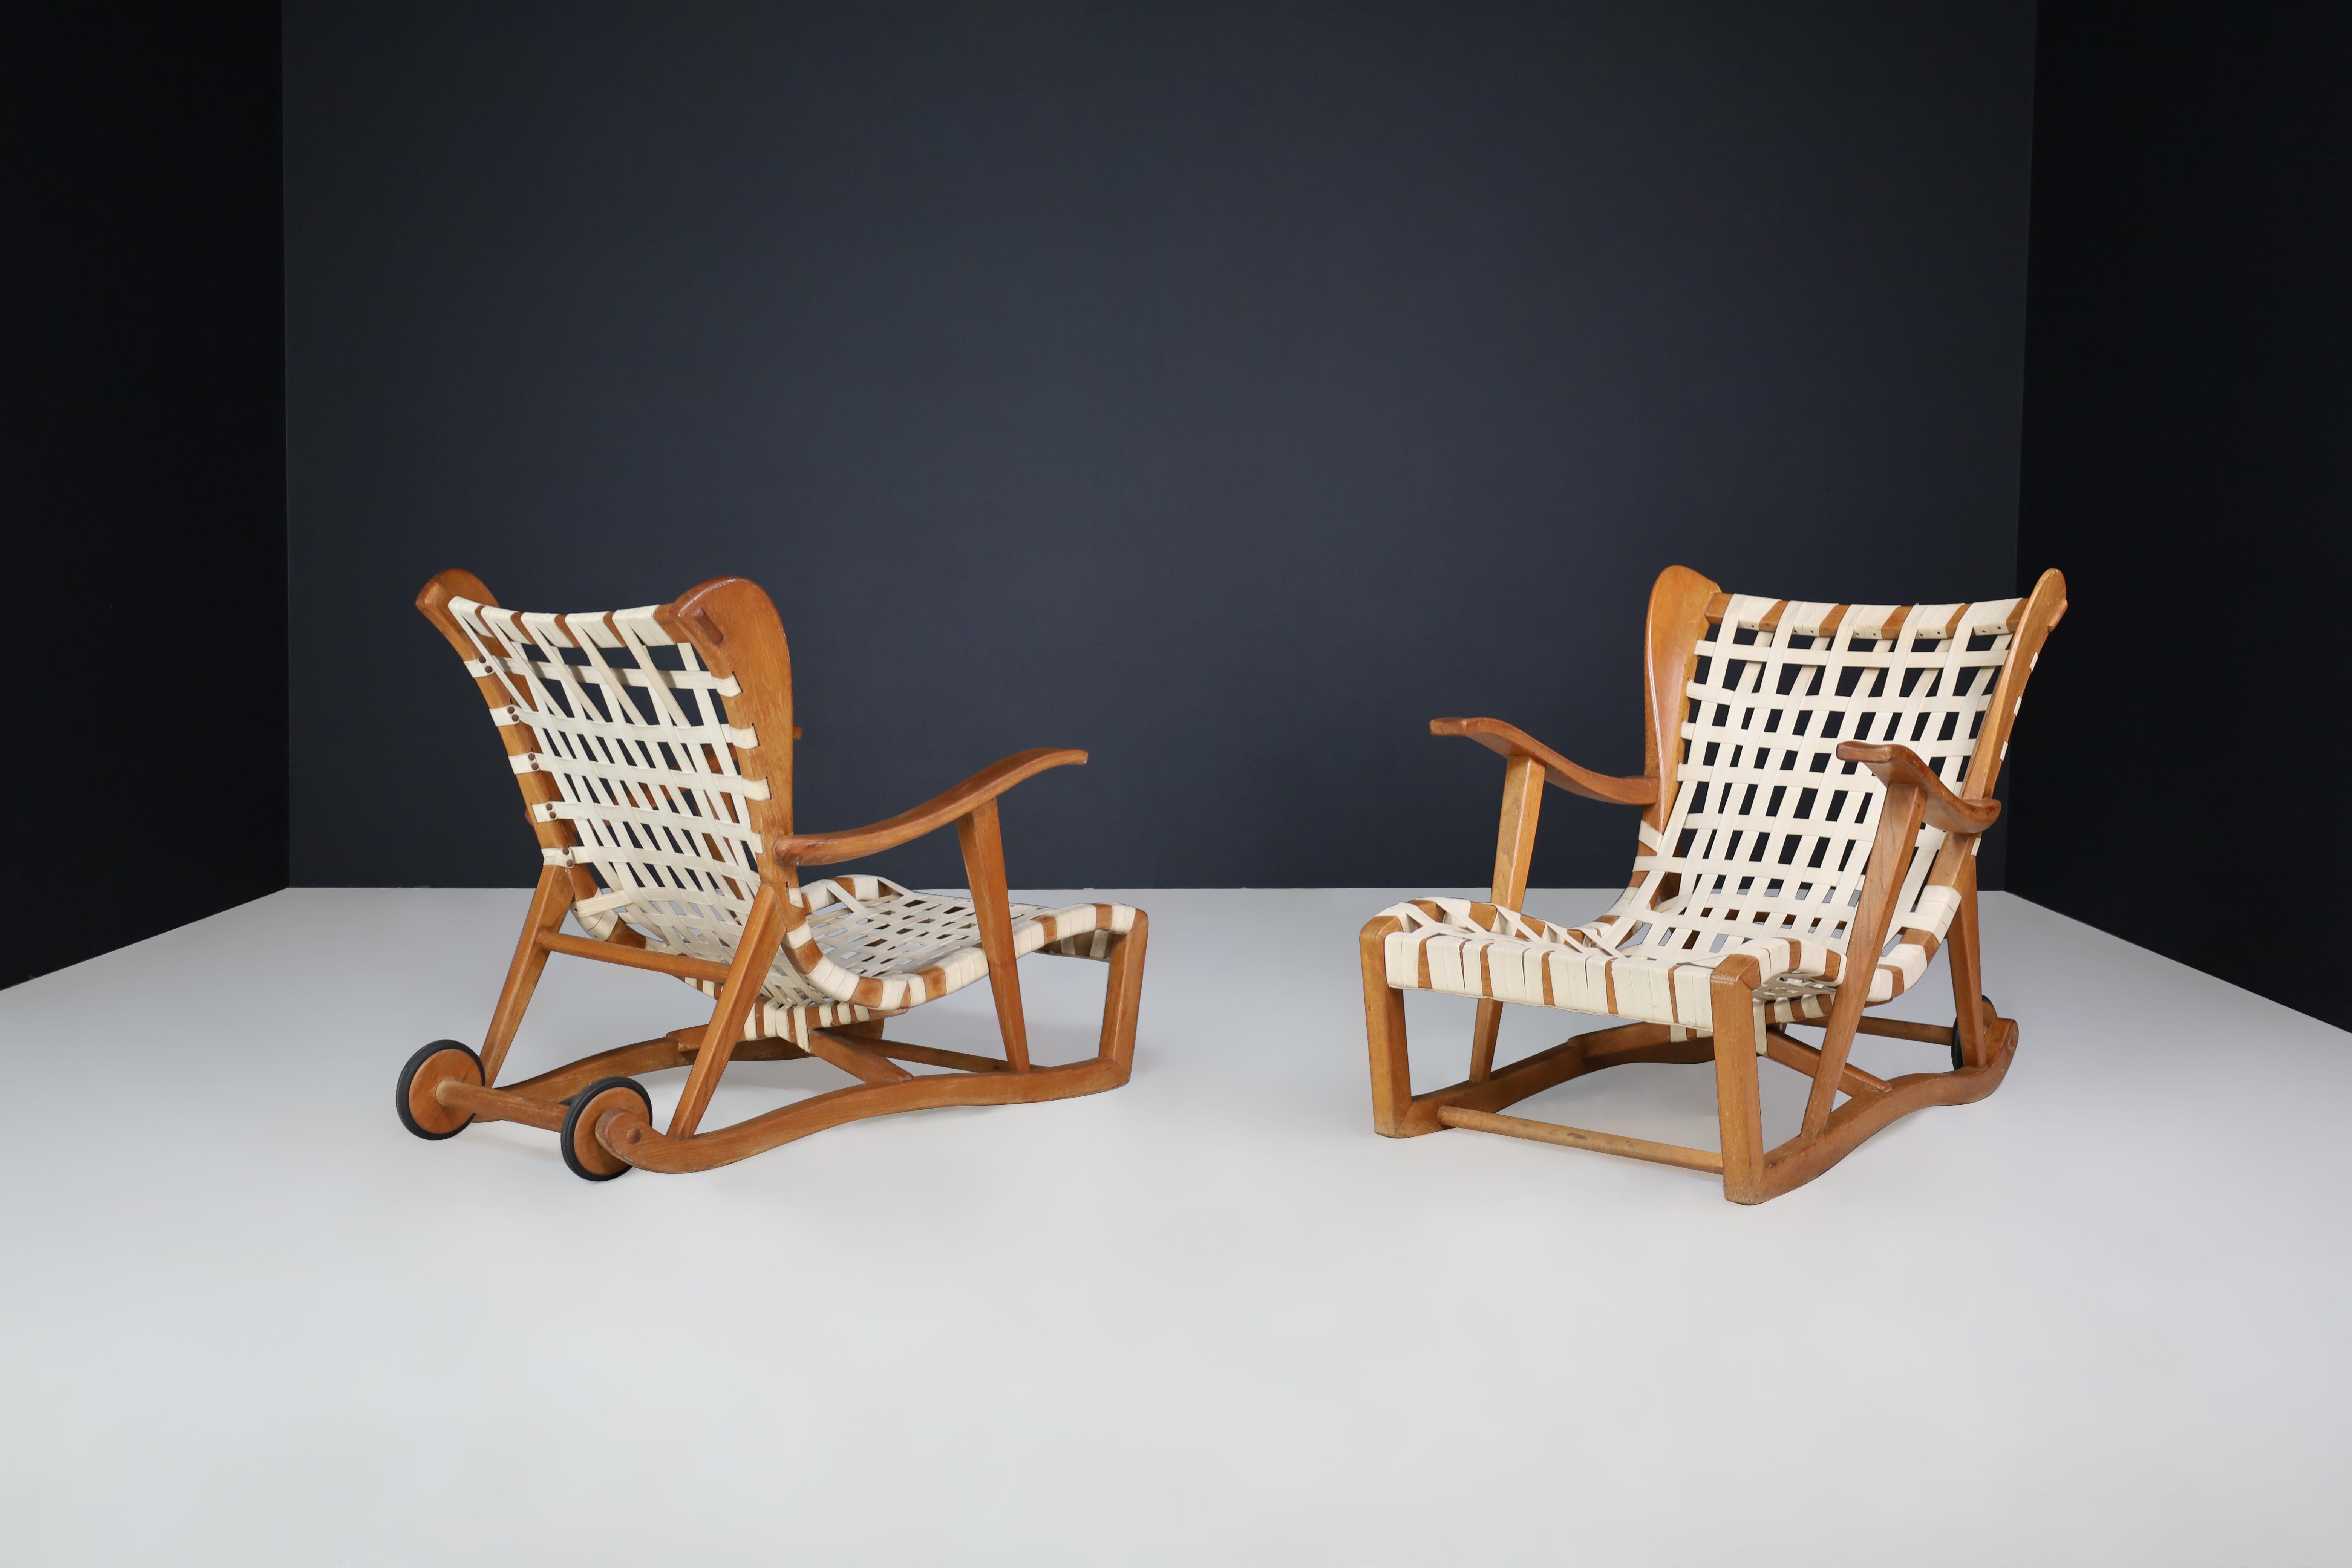 Sculptural oak Lounge chairs by Guglielmo Pecorini, Italy, the 1950s

These lounge chairs are a midcentury design by Guglielmo Pecorini from the 1950s. They are made of oak frames and linen straps with two back wheels. Although they show some signs